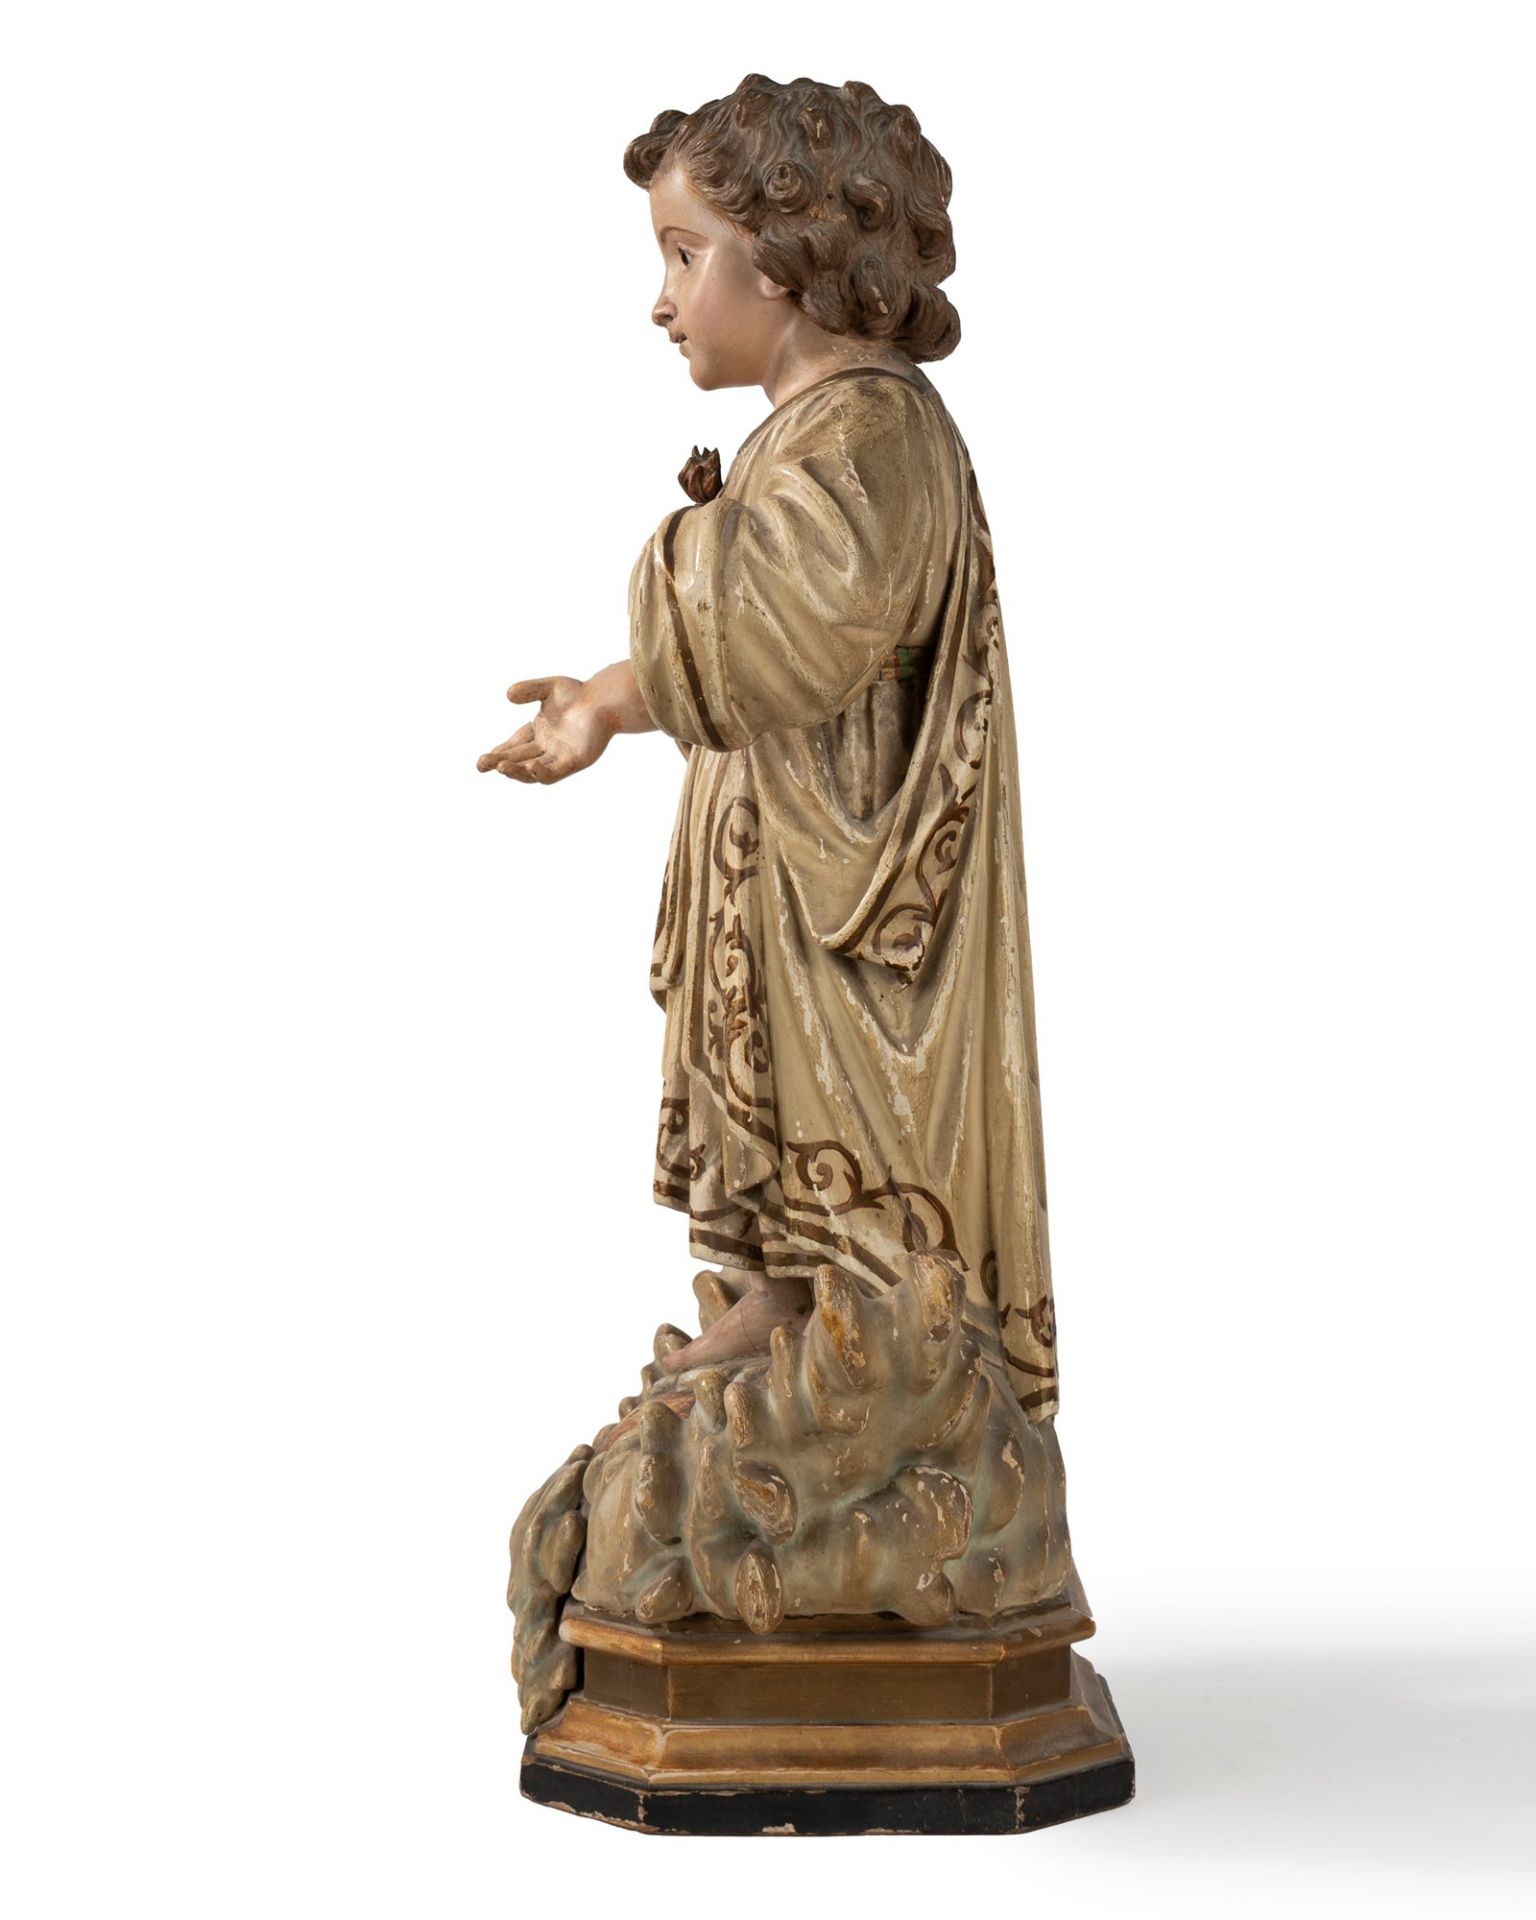 Baby Jesus in carved and lacquered wood, 19th century - Image 8 of 8